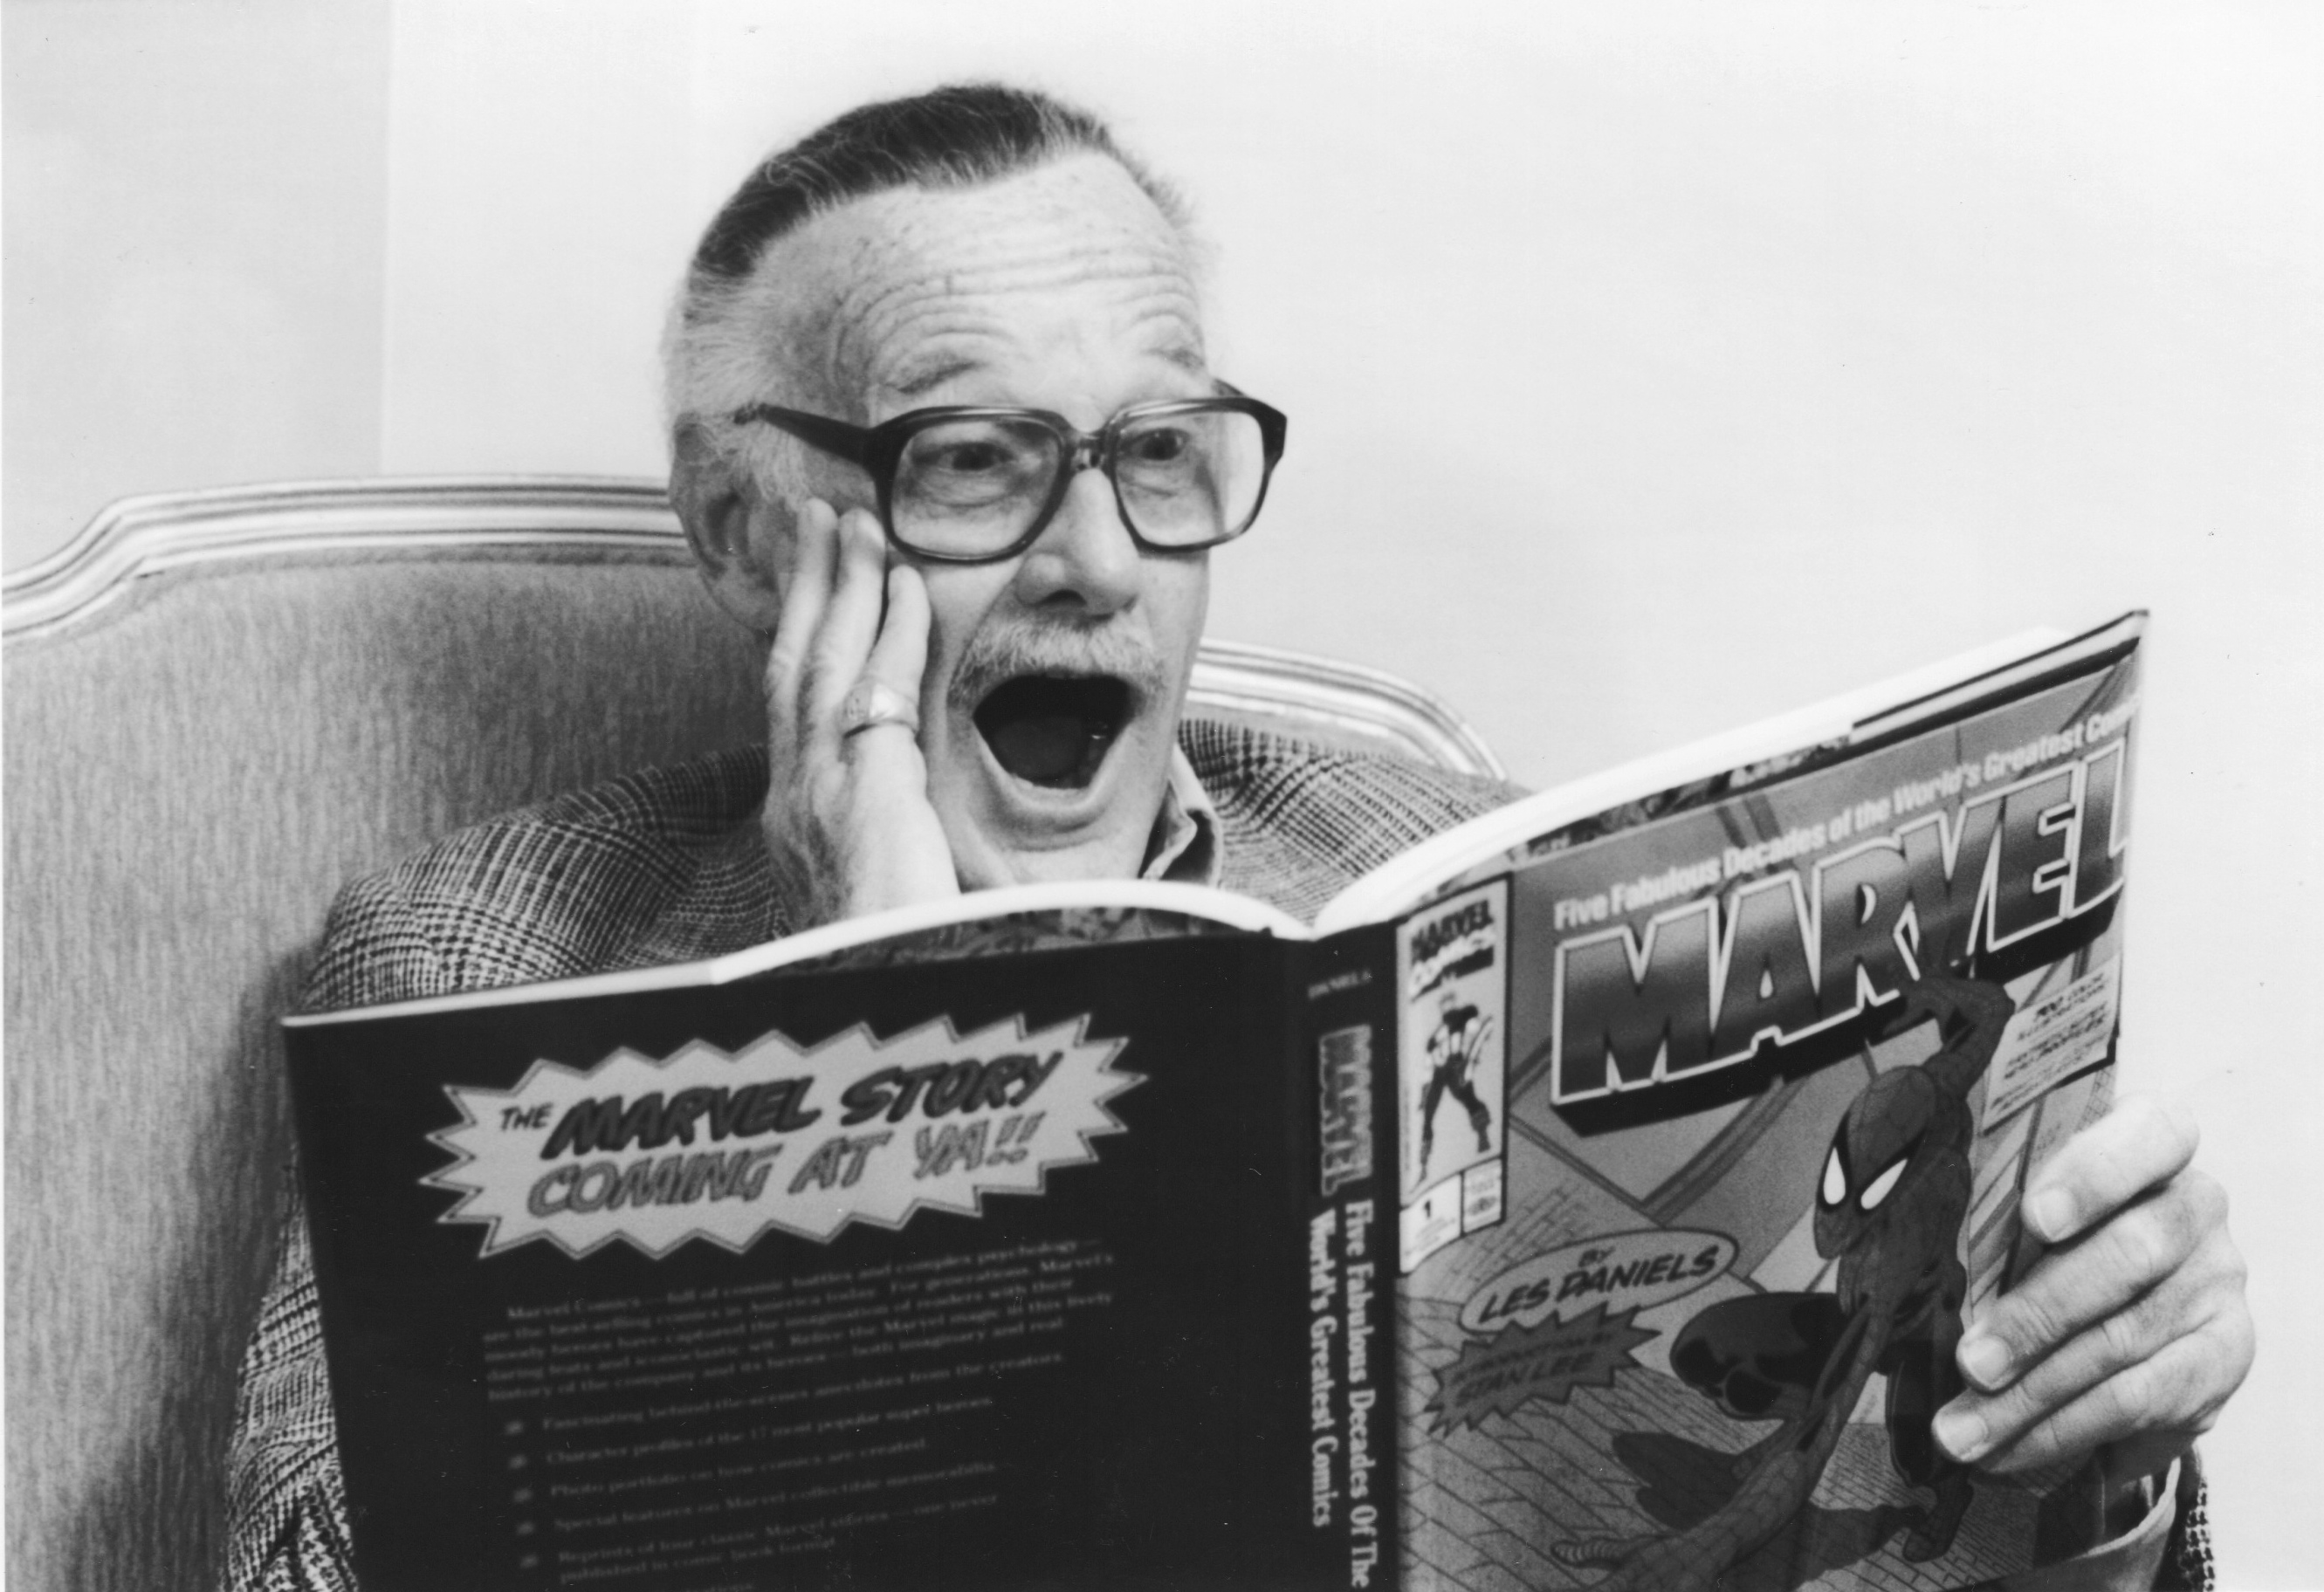 Marvel Comics legend Stan Lee reads a Marvel comic book. His hand is placed on his cheek and his mouth is agape. He is wearing glasses. The photo is in black and white.